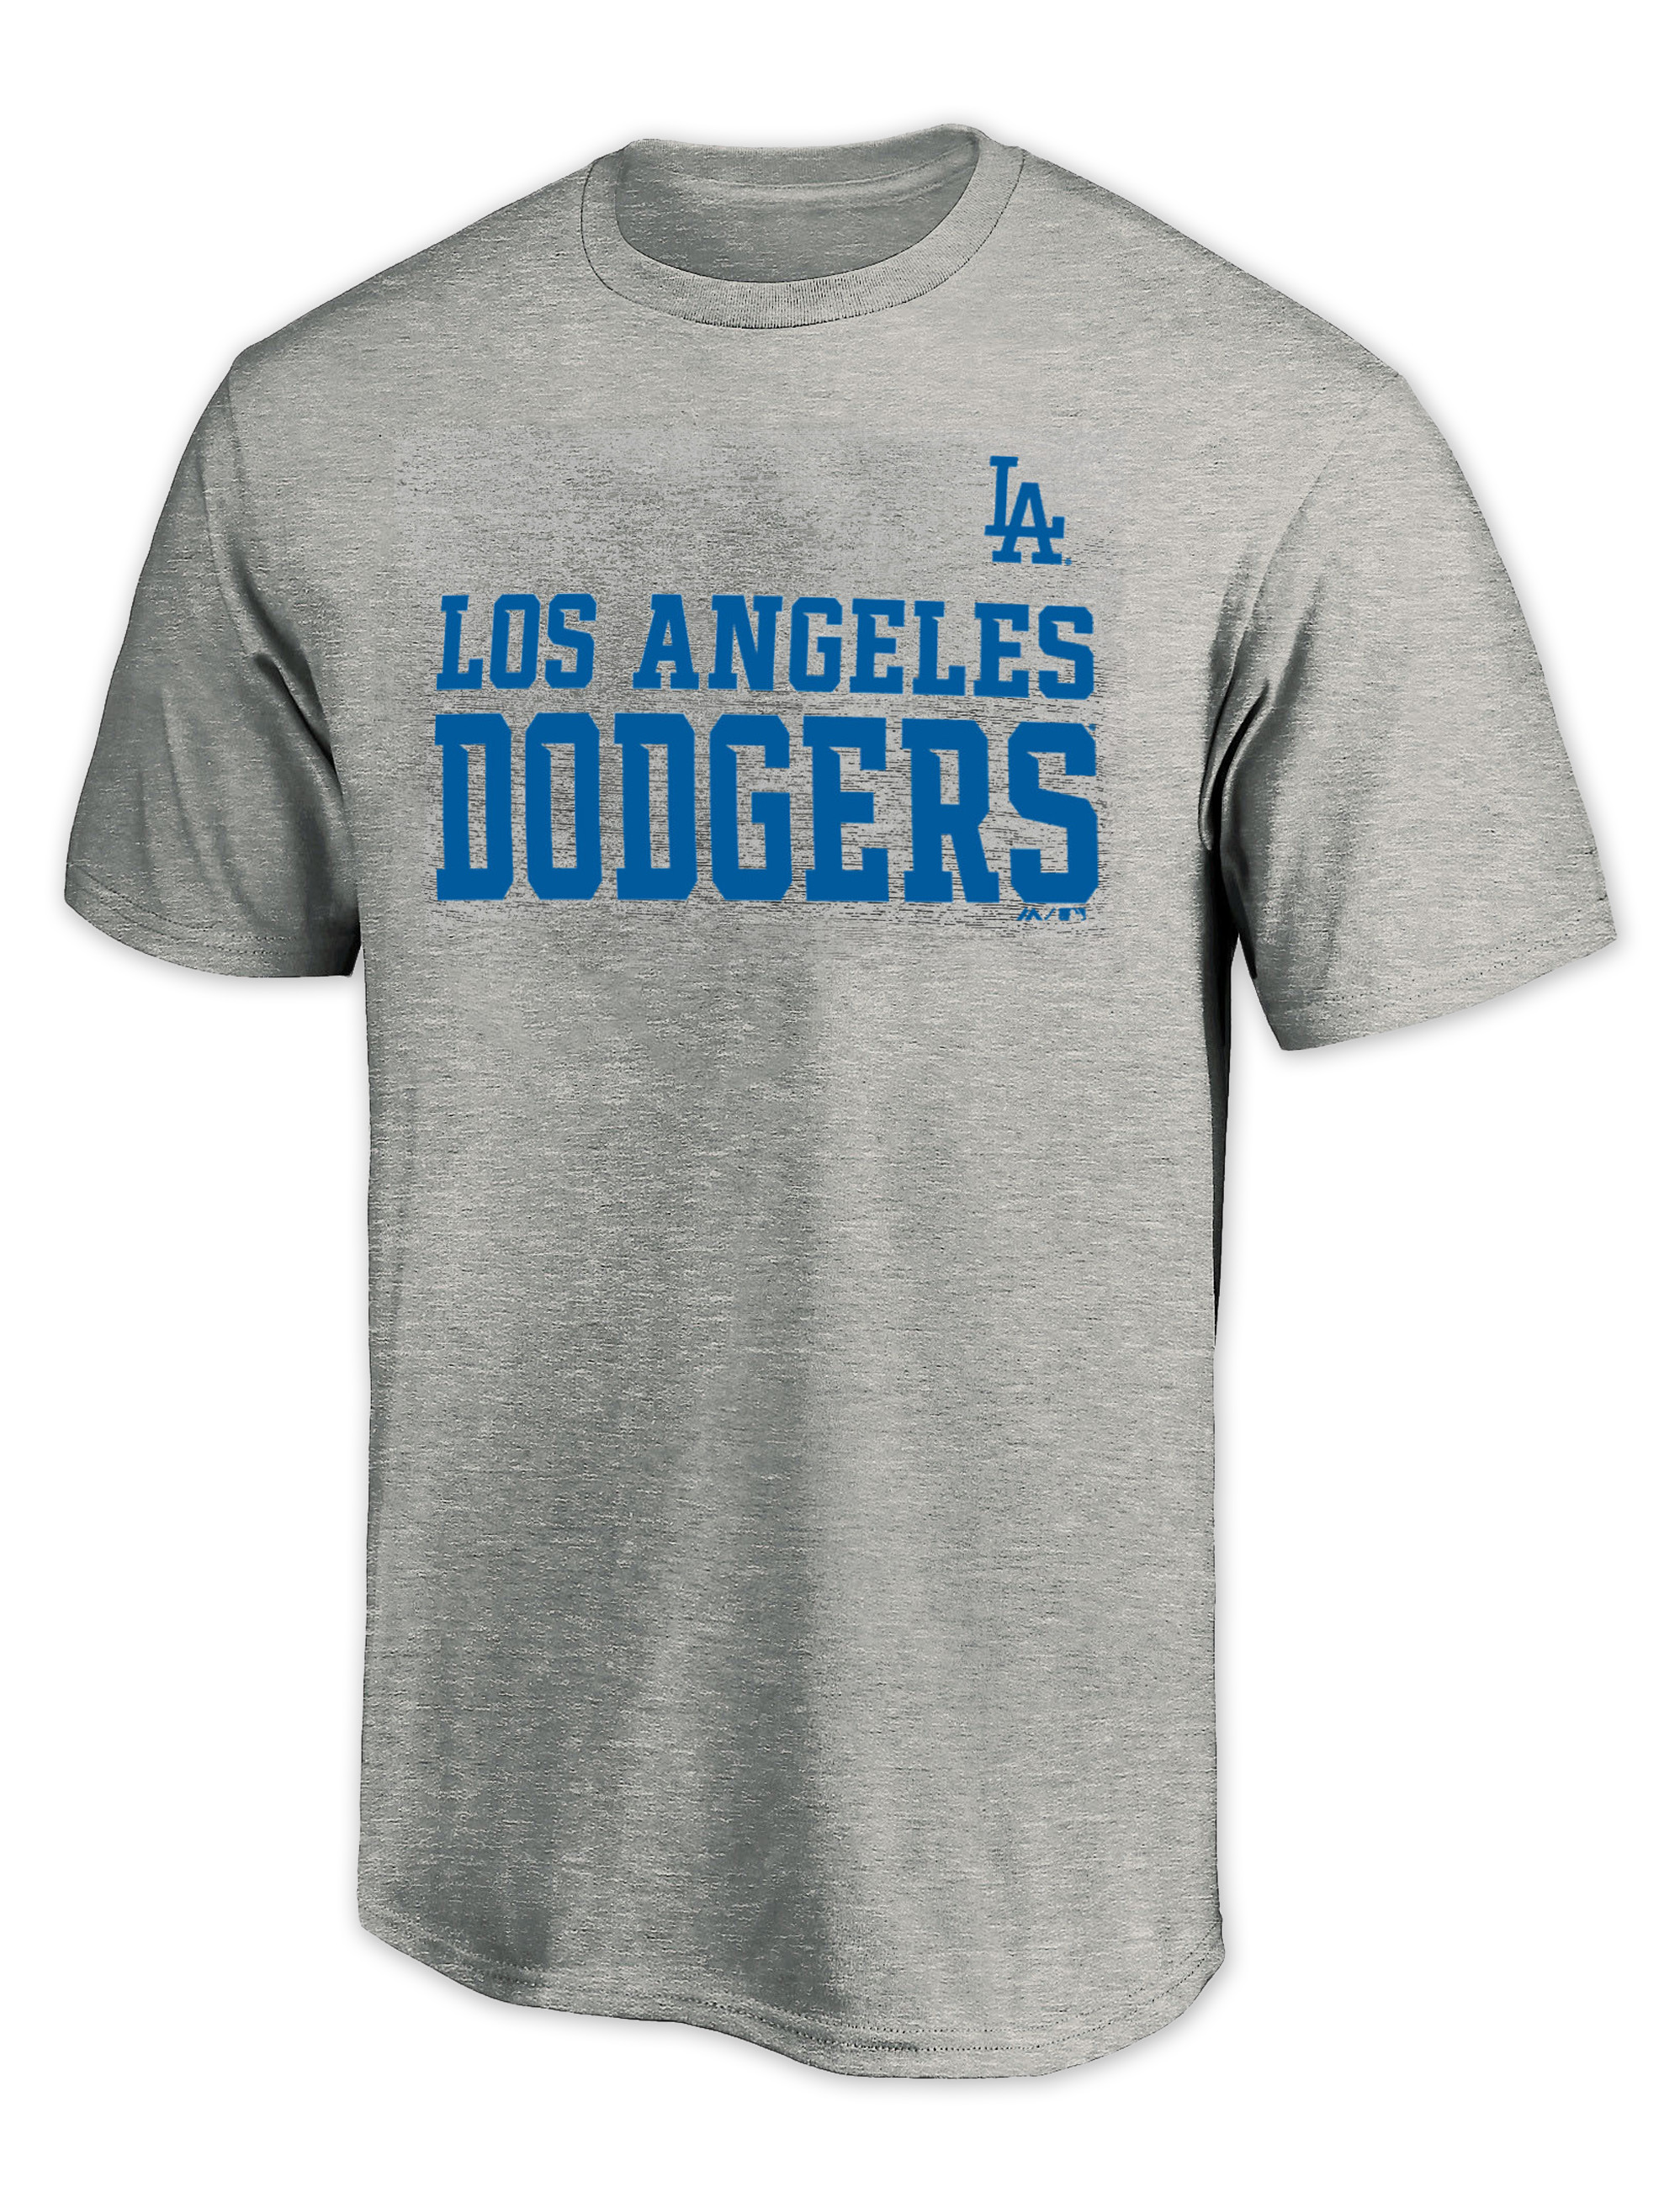 dodgers items